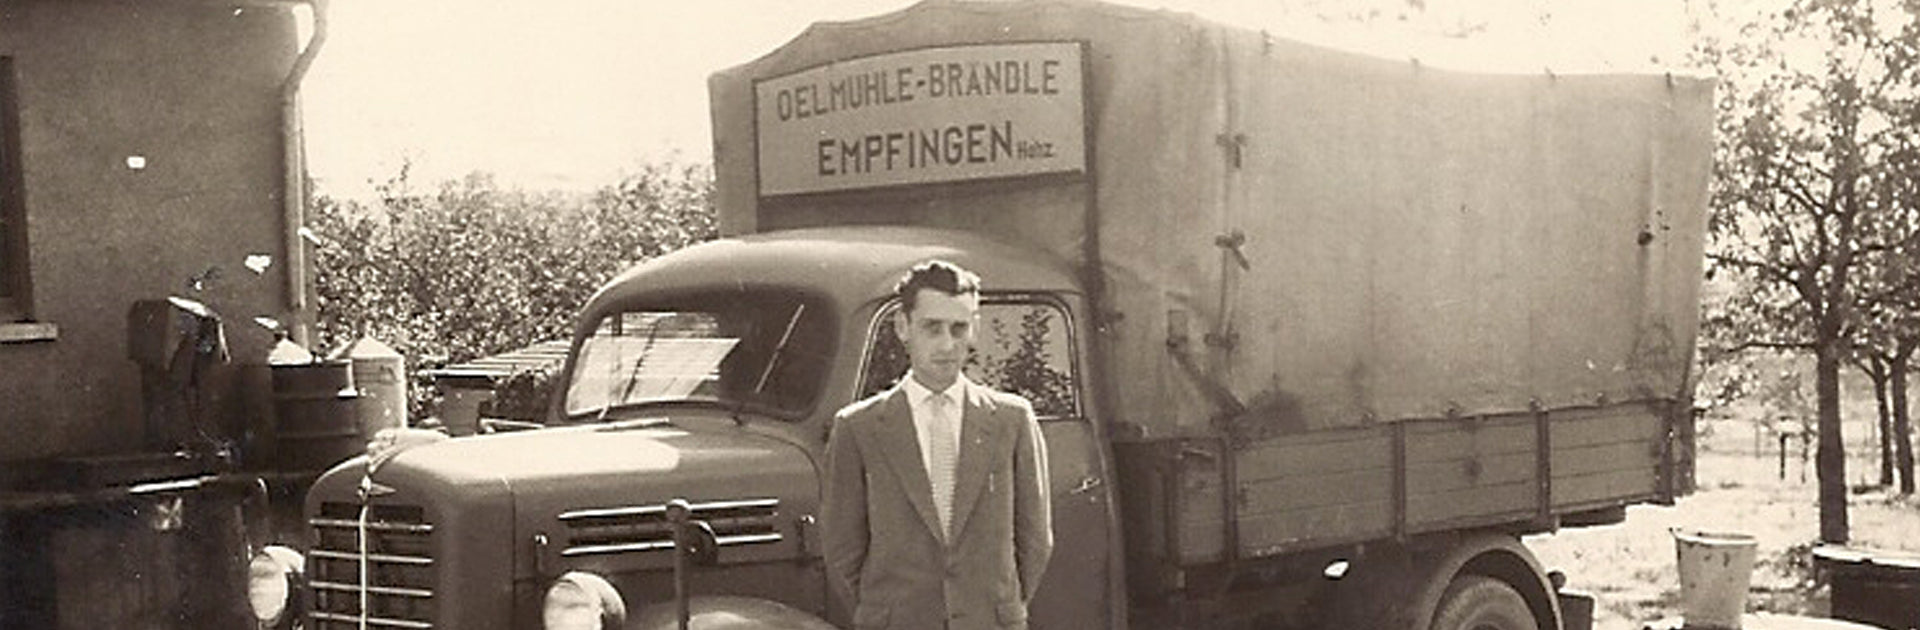 As a young man, Pius Brändle stands in front of a truck that was used to transport goods at the time.